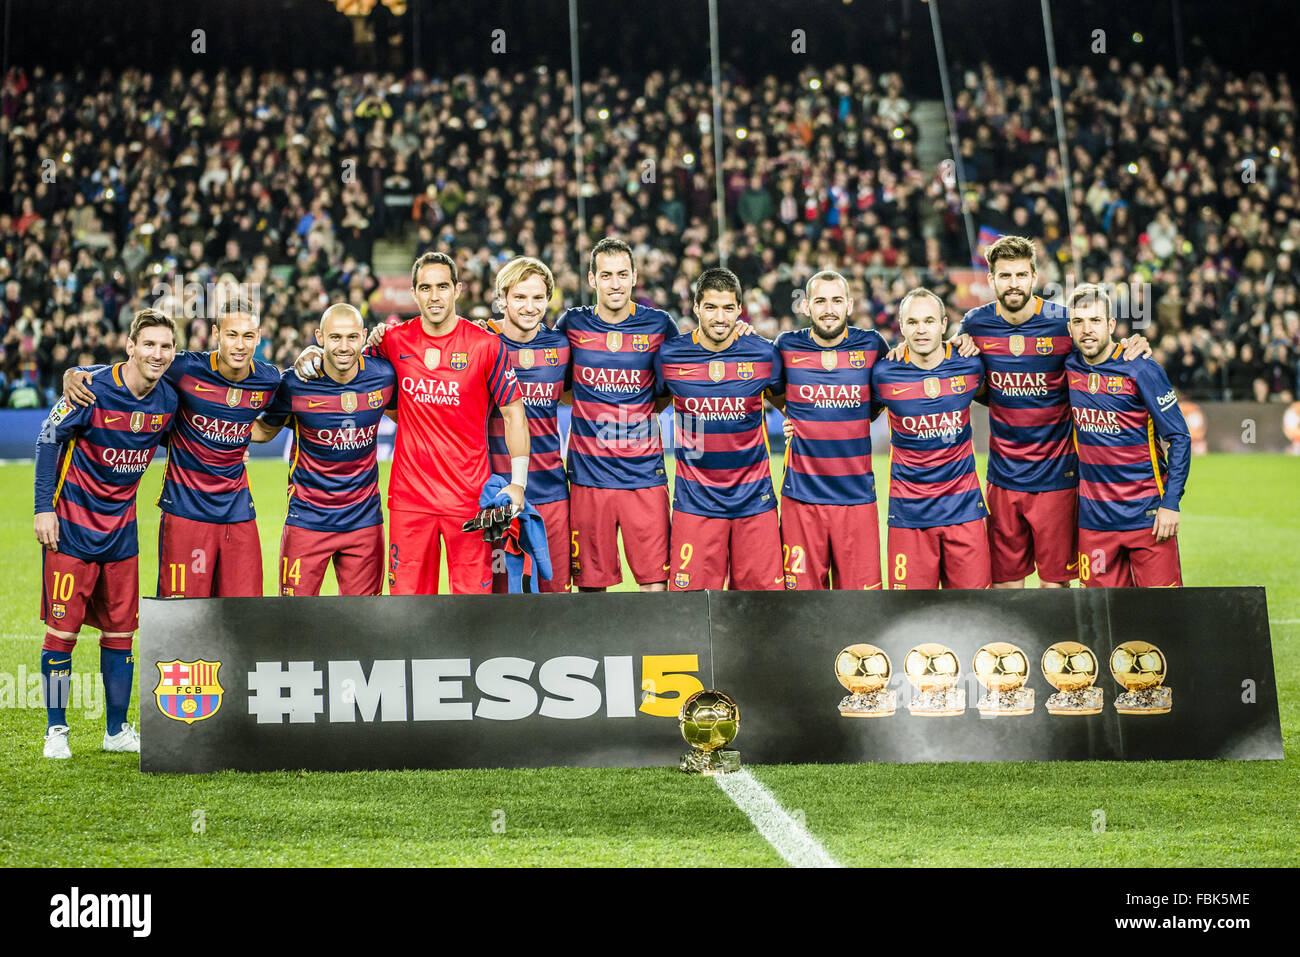 Fc barcelona team group photo High Resolution Stock Photography and Images  - Alamy